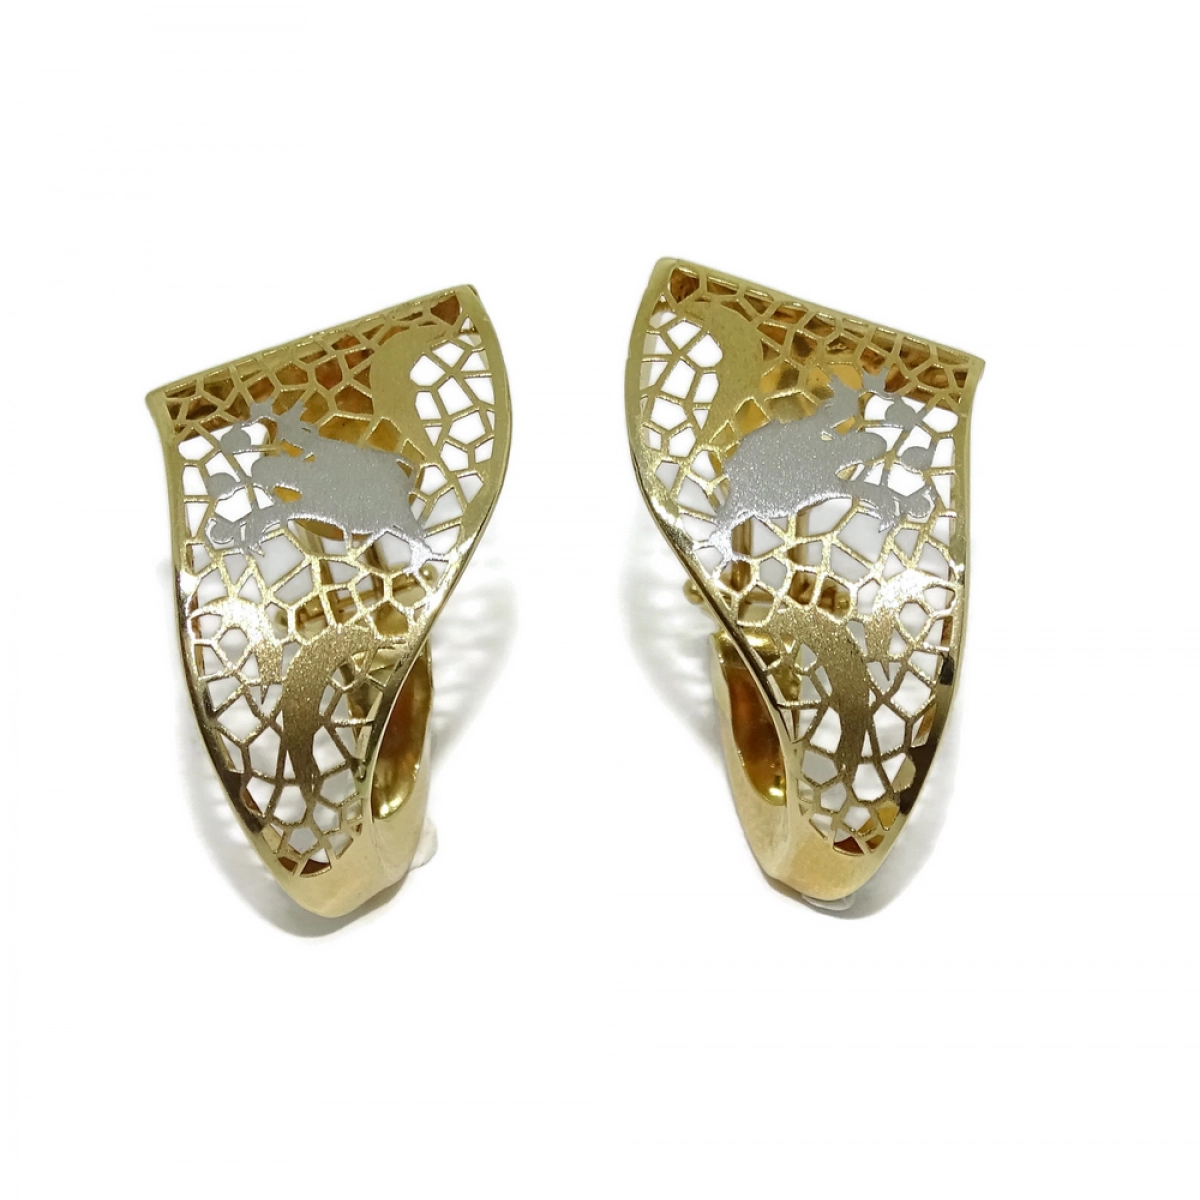 EARRINGS FOR WOMAN IN 18K YELLOW GOLD, LARGE, WITH DESIGN OR BOLD, MODERN, AND VERY COLORFUL. NEVER SAY NEVER